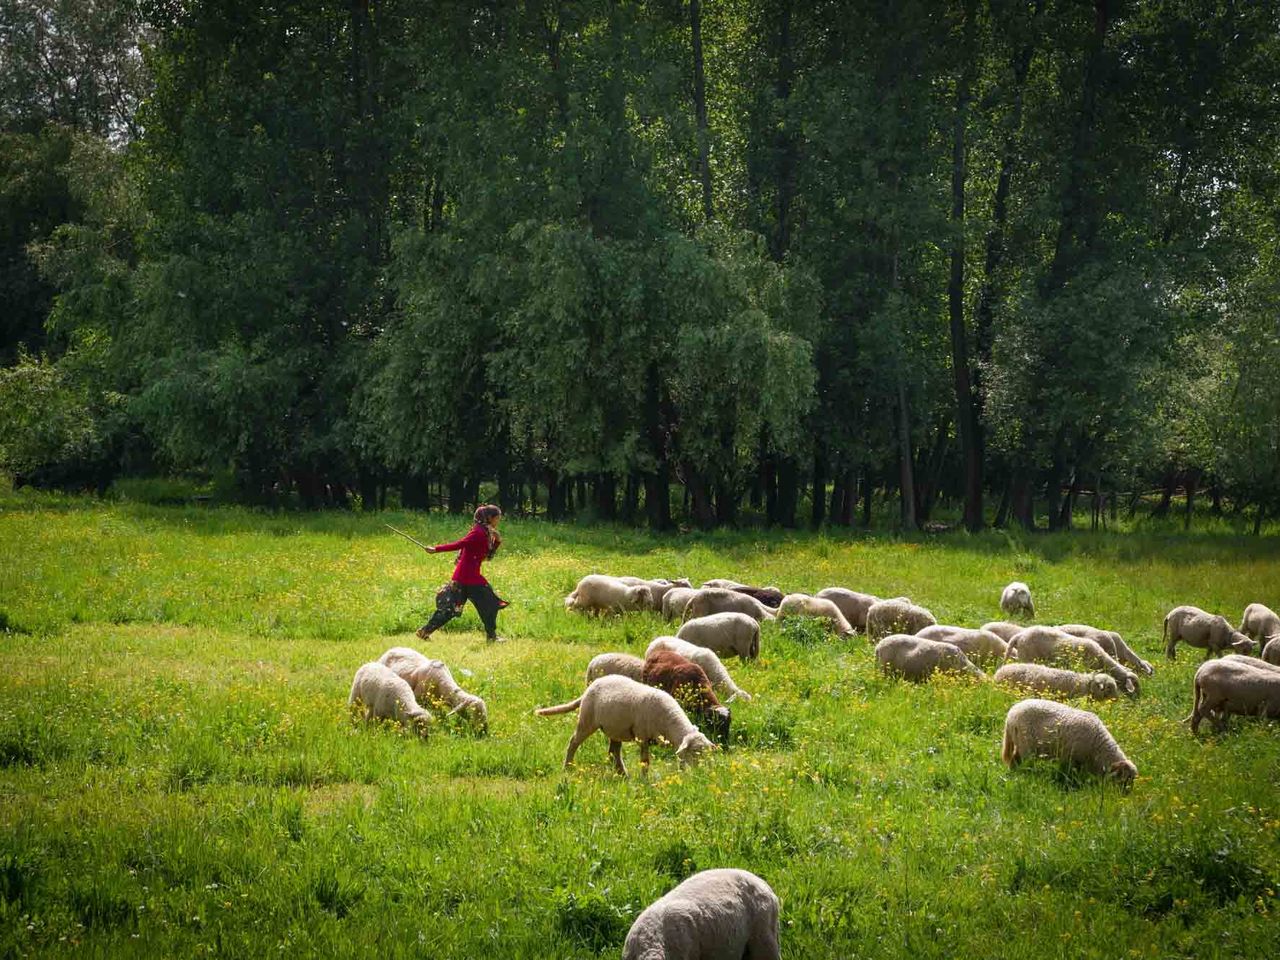 15-year-old Shama looks after her flock of sheep in the Shalimar area on the outskirts of Srinagar. “Menstruation brings a lot of hurdles for me.” Date: 5 May, 2022.